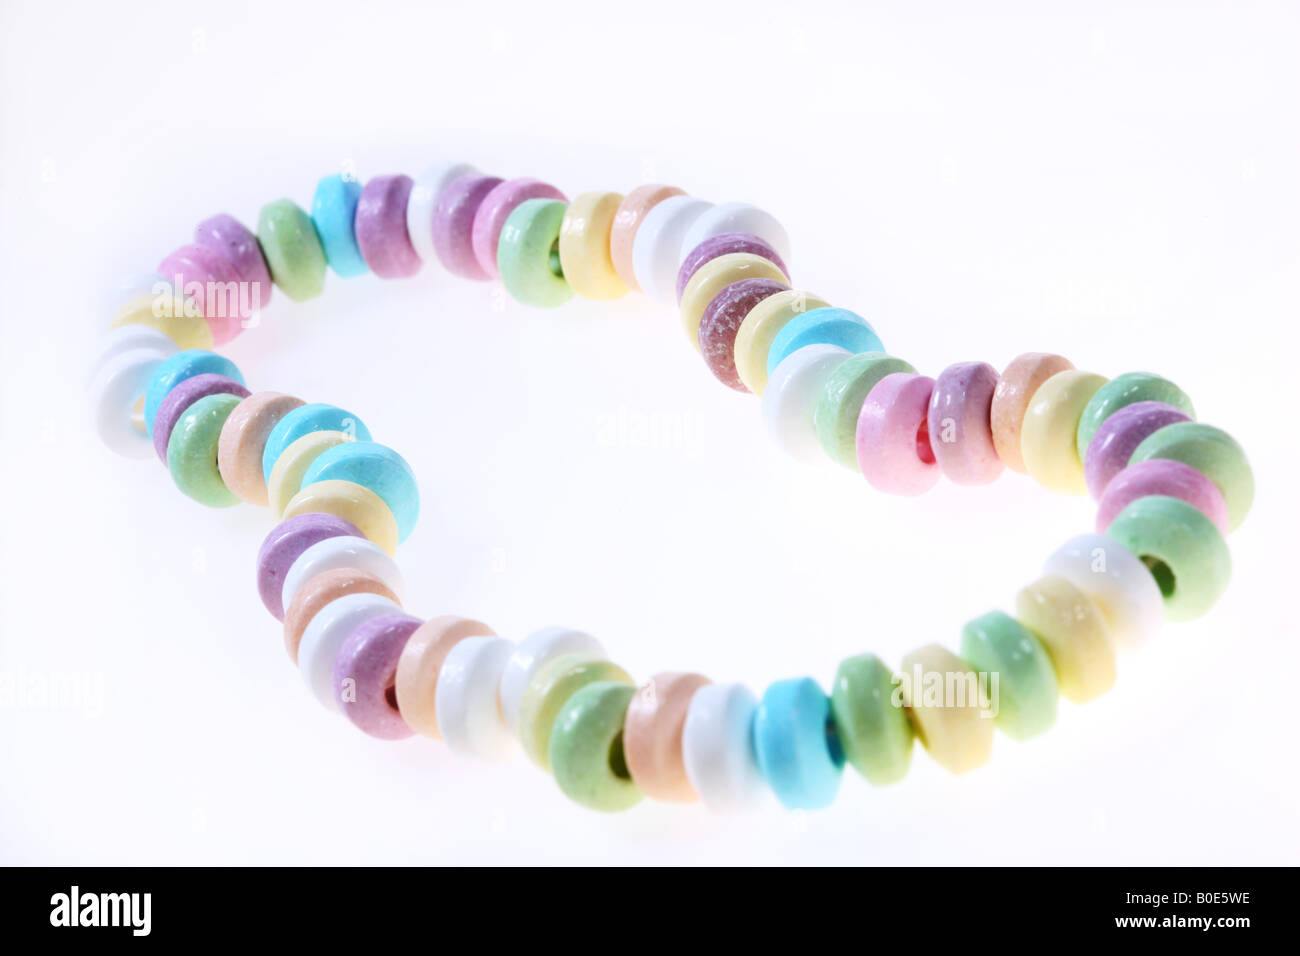 Fun Multicolored Candy Beads Group Stock Photo 1415916746